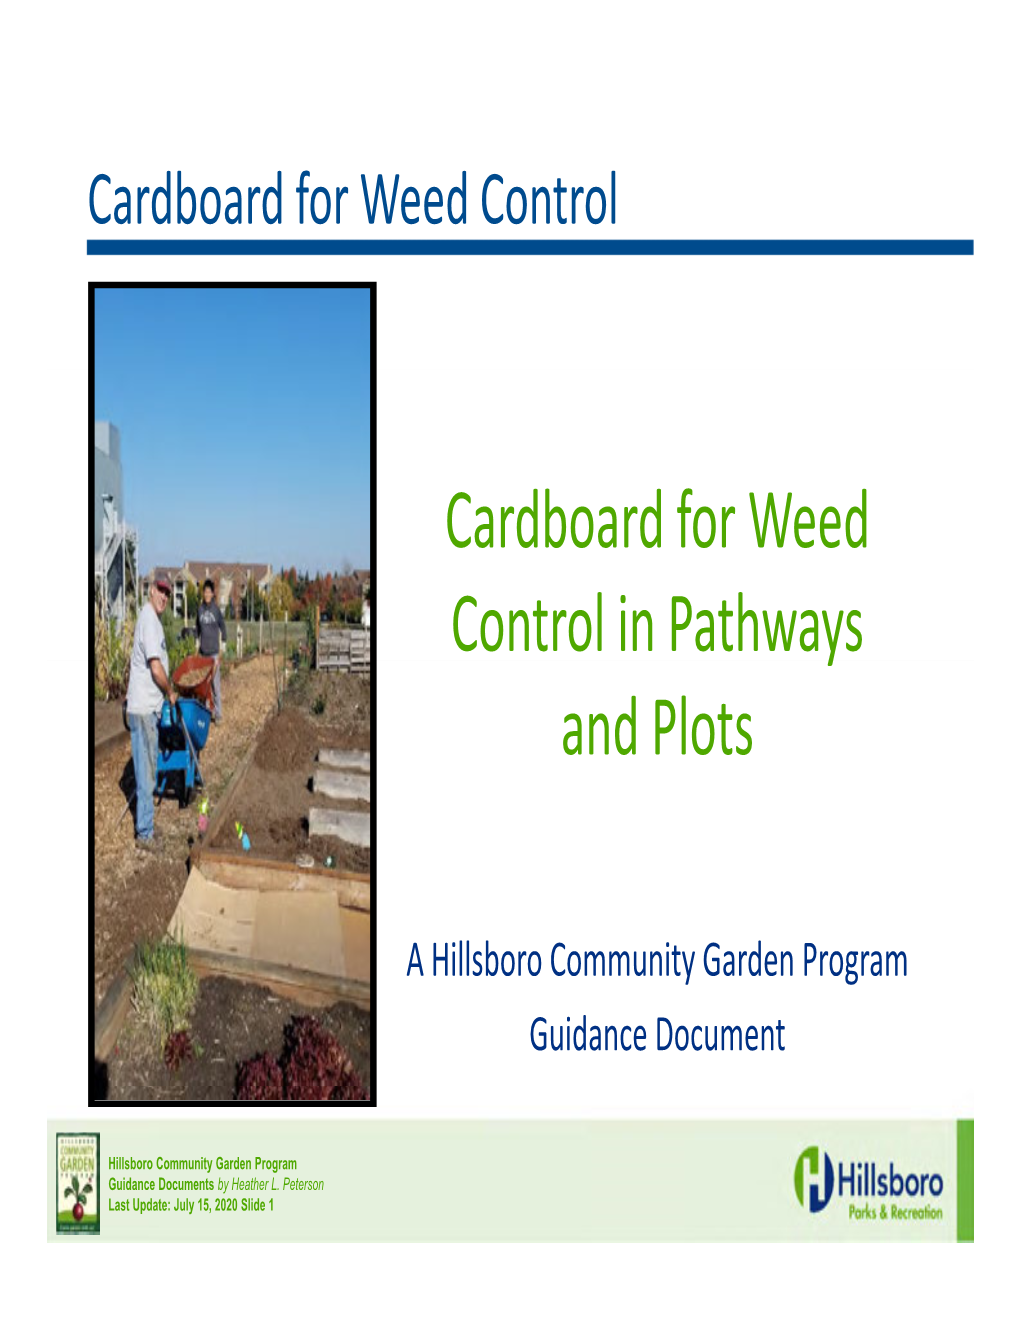 Cardboard for Weed Control in Pathways and Plots